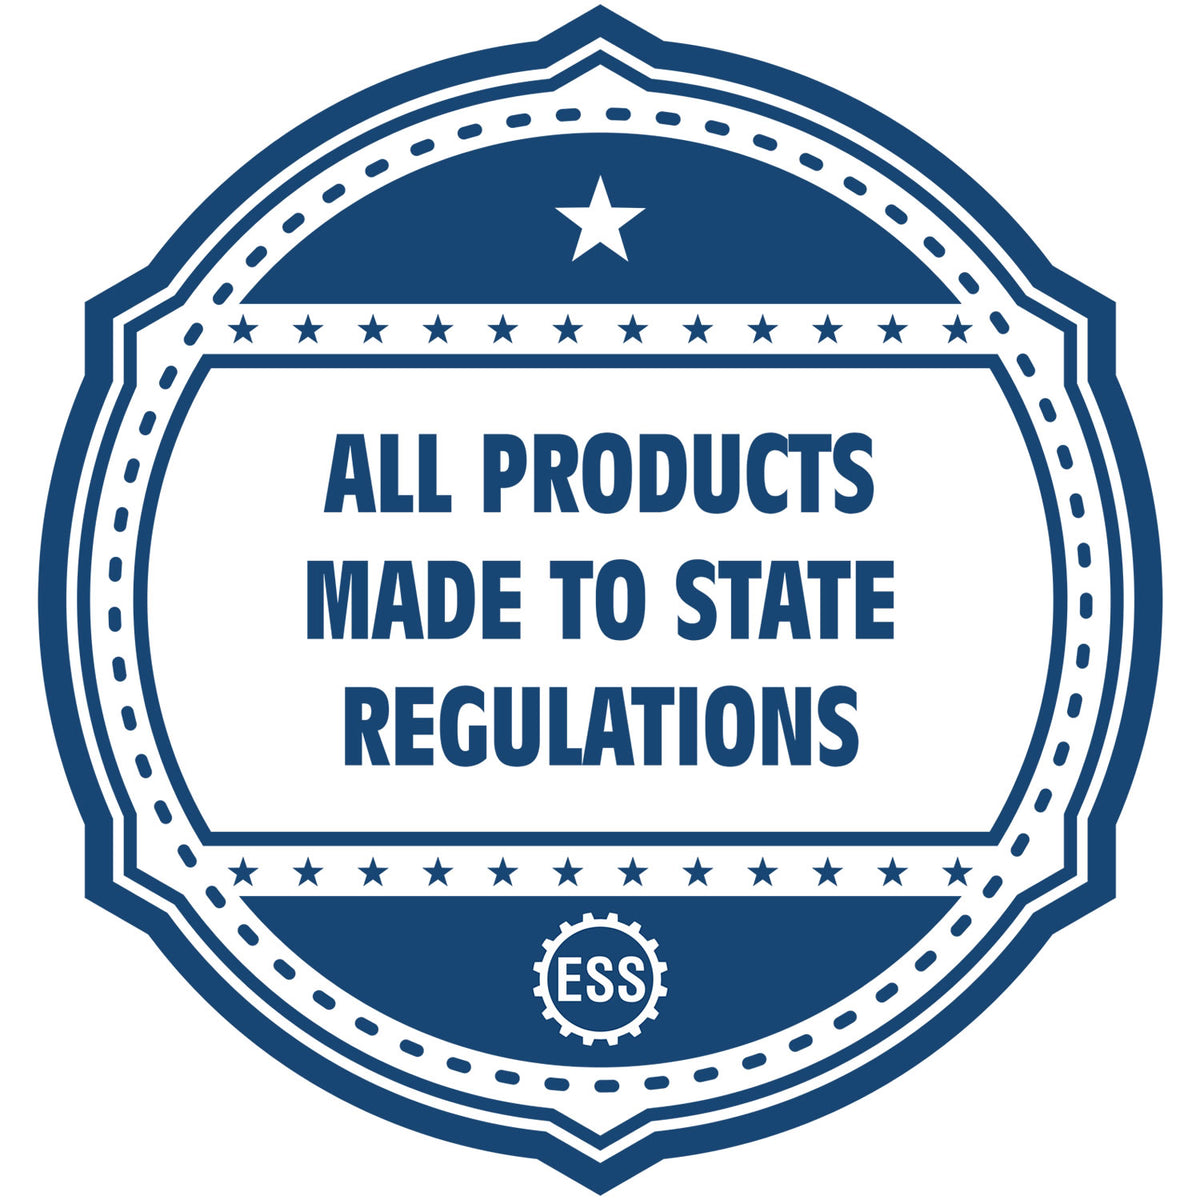 A blue icon or badge for the Gift Mississippi Landscape Architect Seal showing that this product is made in compliance with state regulations.